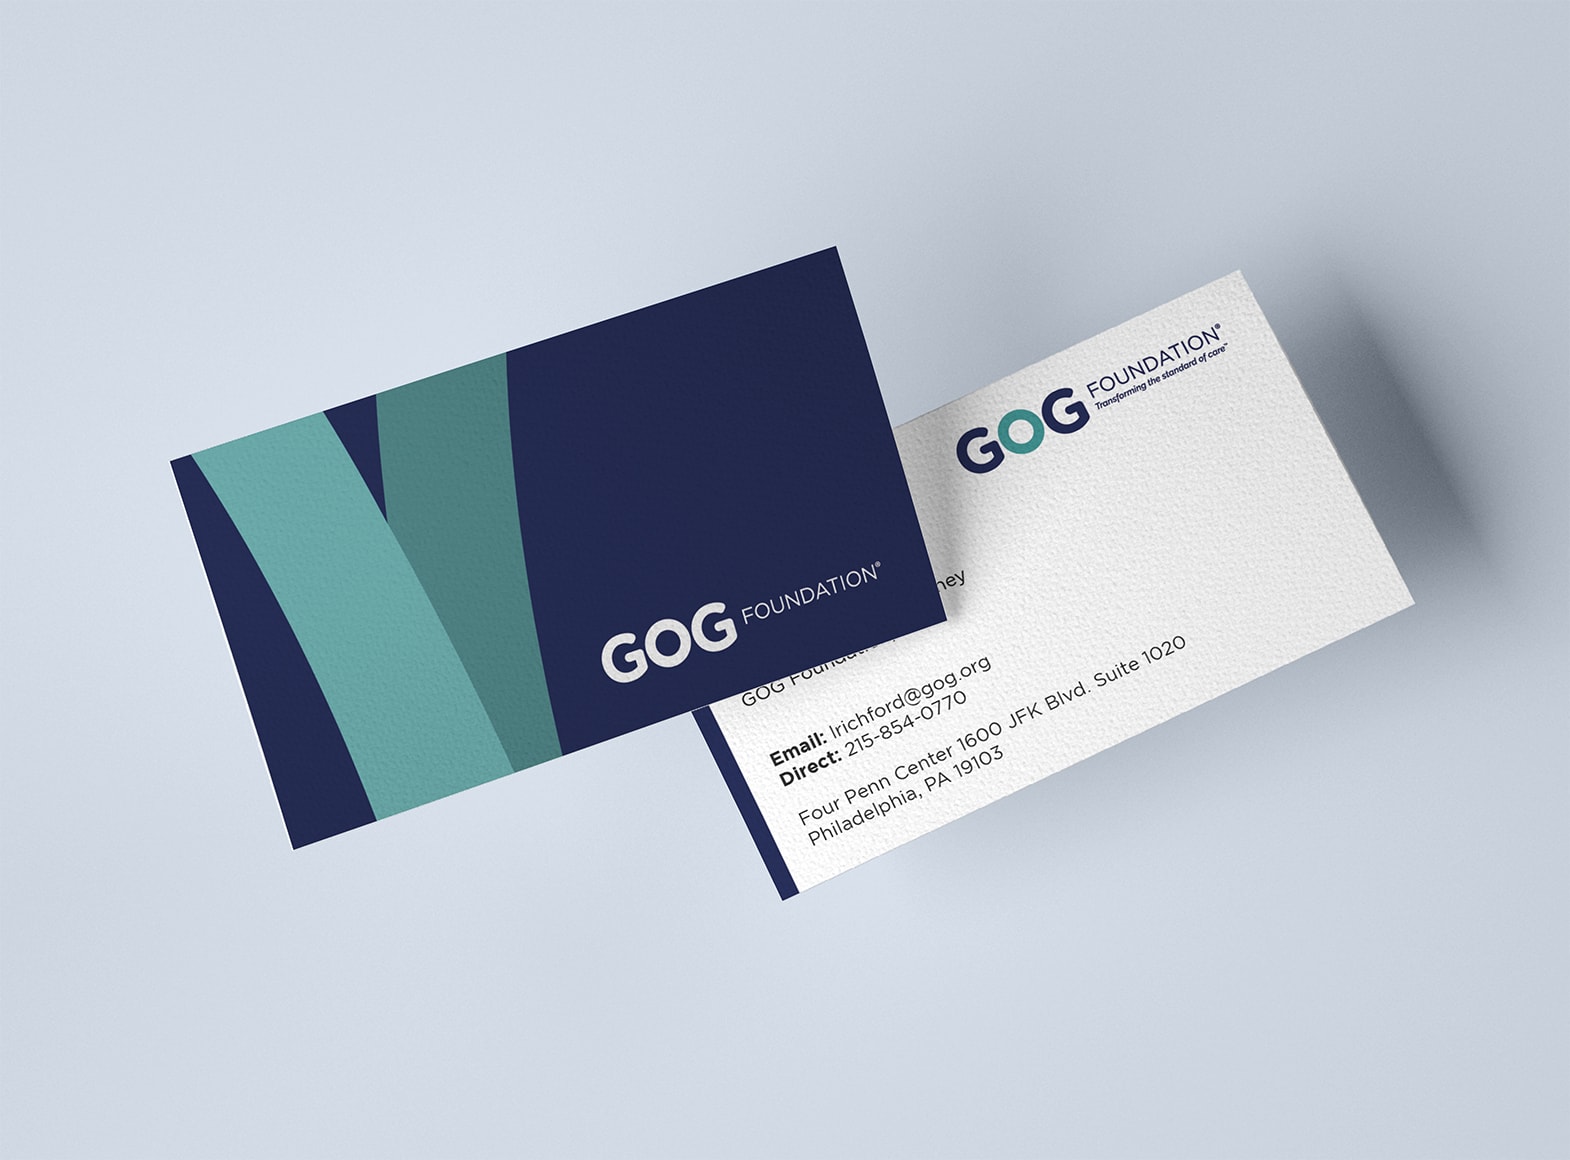 GOG business cards with clean, modern design